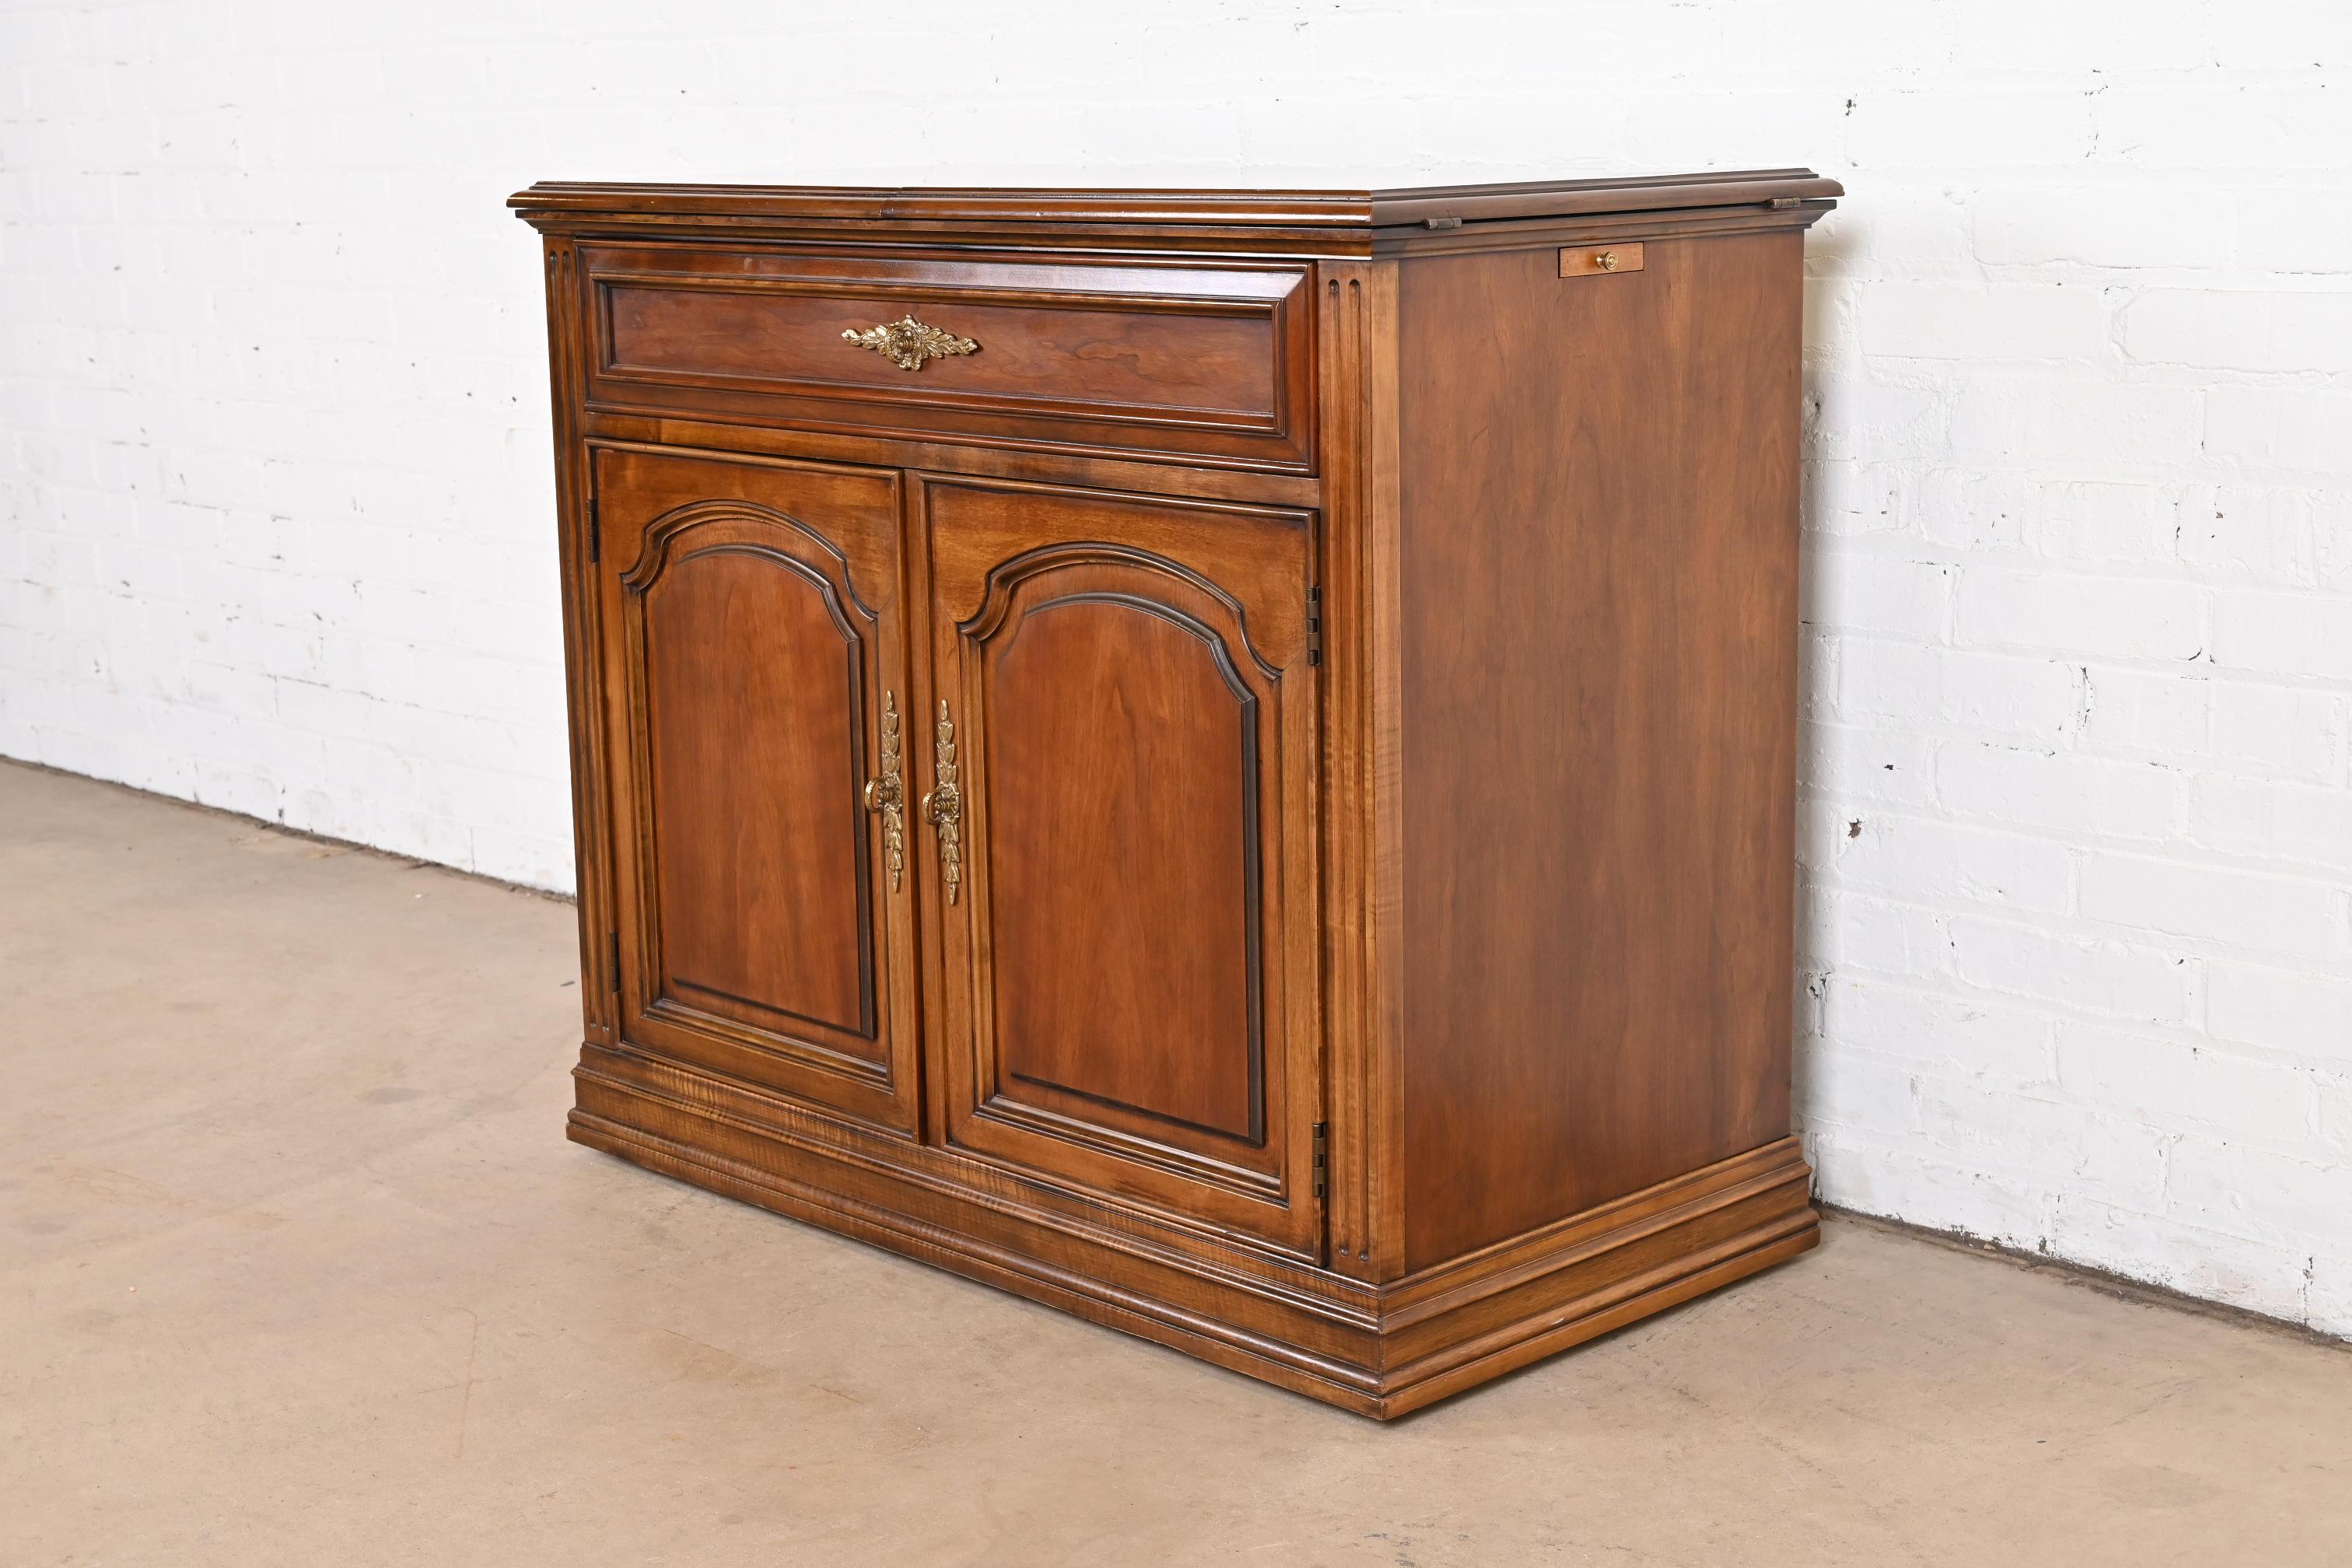 French Regency Louis XVI Cherry Wood Fliptop Bar Cabinet by White Furniture In Good Condition For Sale In South Bend, IN